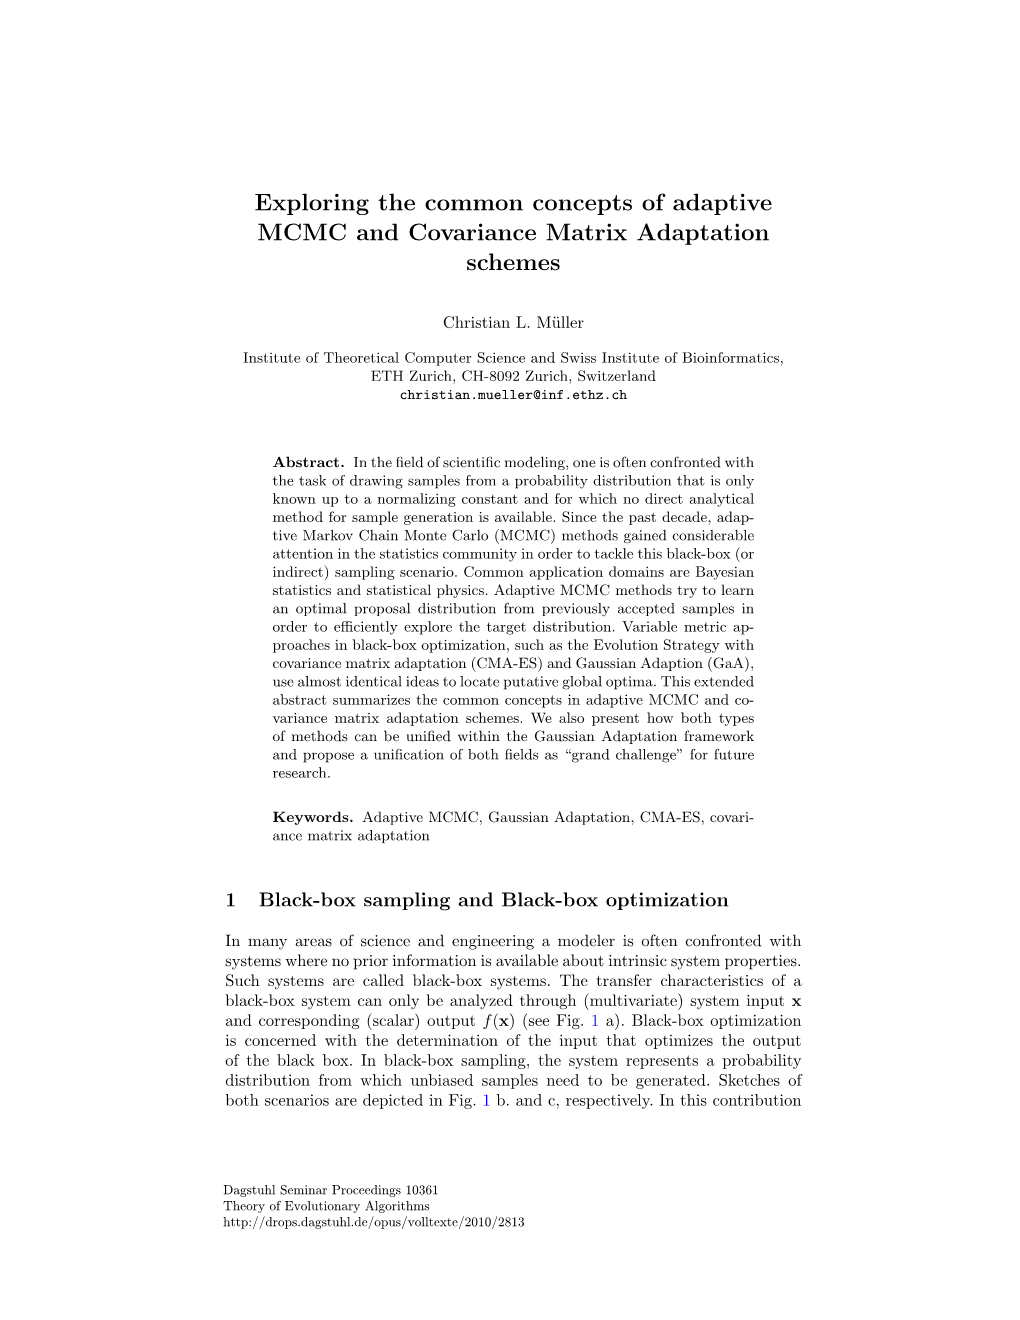 Exploring the Common Concepts of Adaptive MCMC and Covariance Matrix Adaptation Schemes